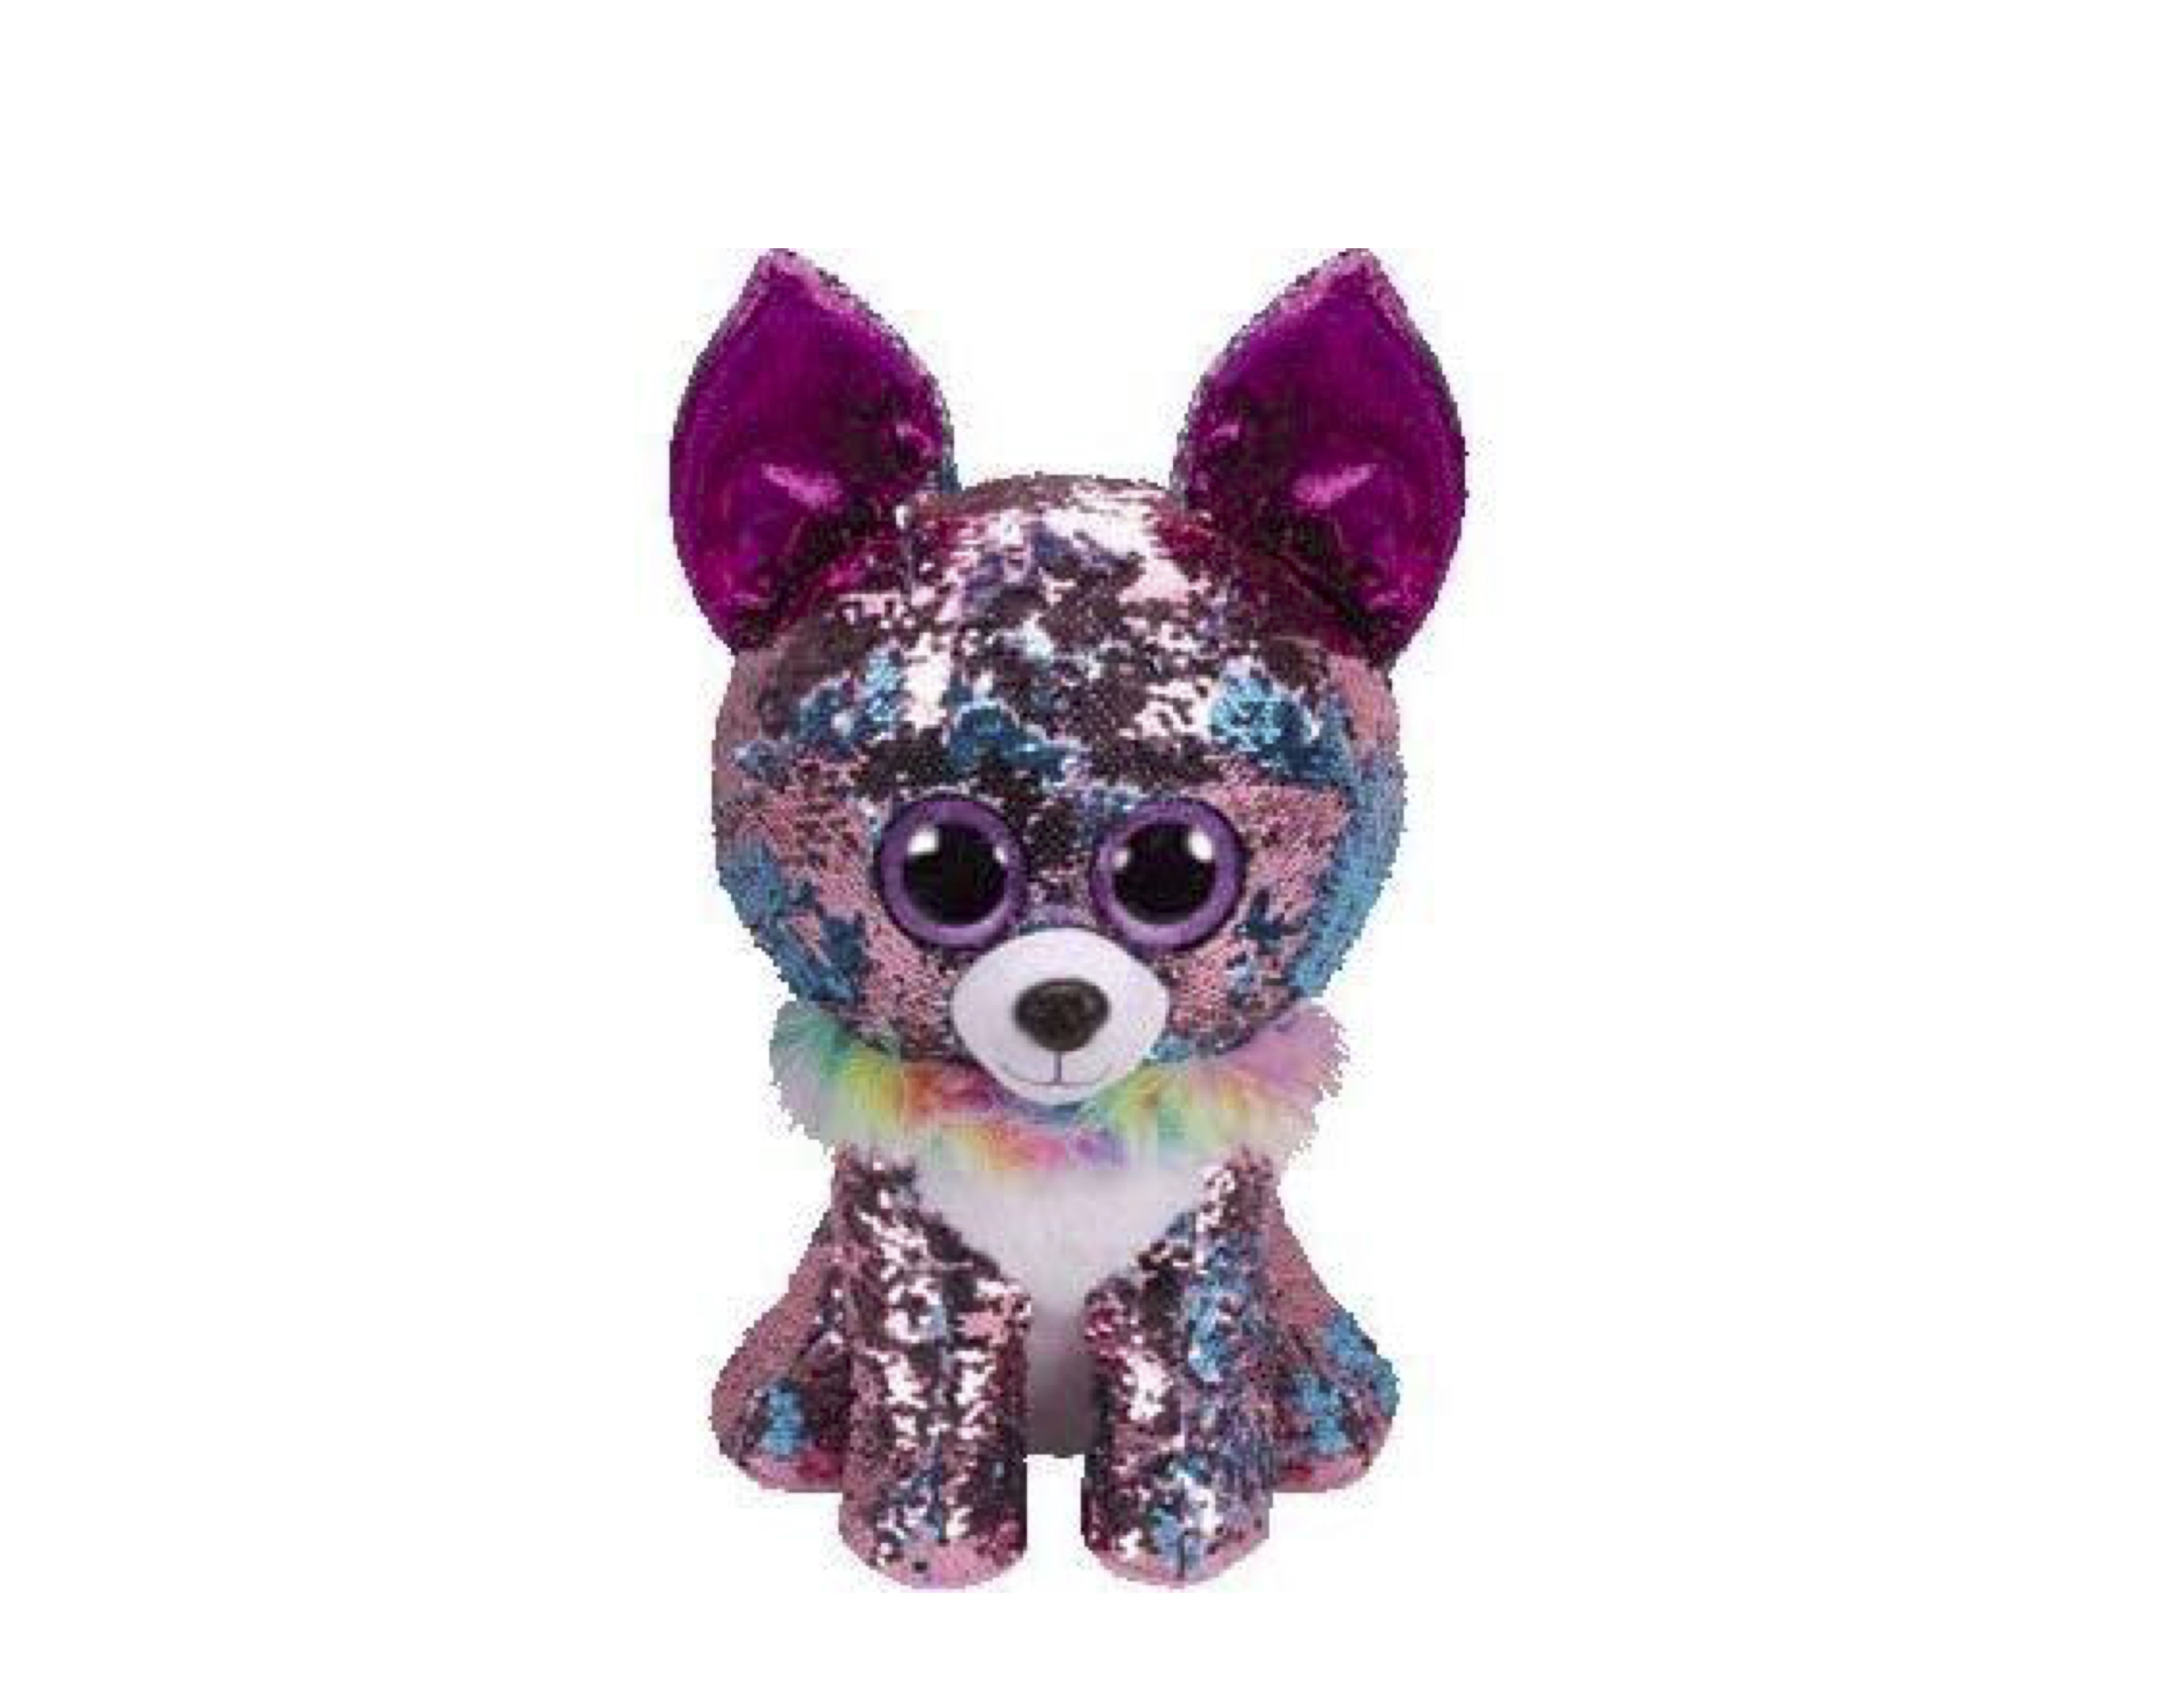 TY Flippables Reverse Sequin Stuffed Animal Beanie Boo Plush Toy Large Size (16”) - Yappy Chihuahua